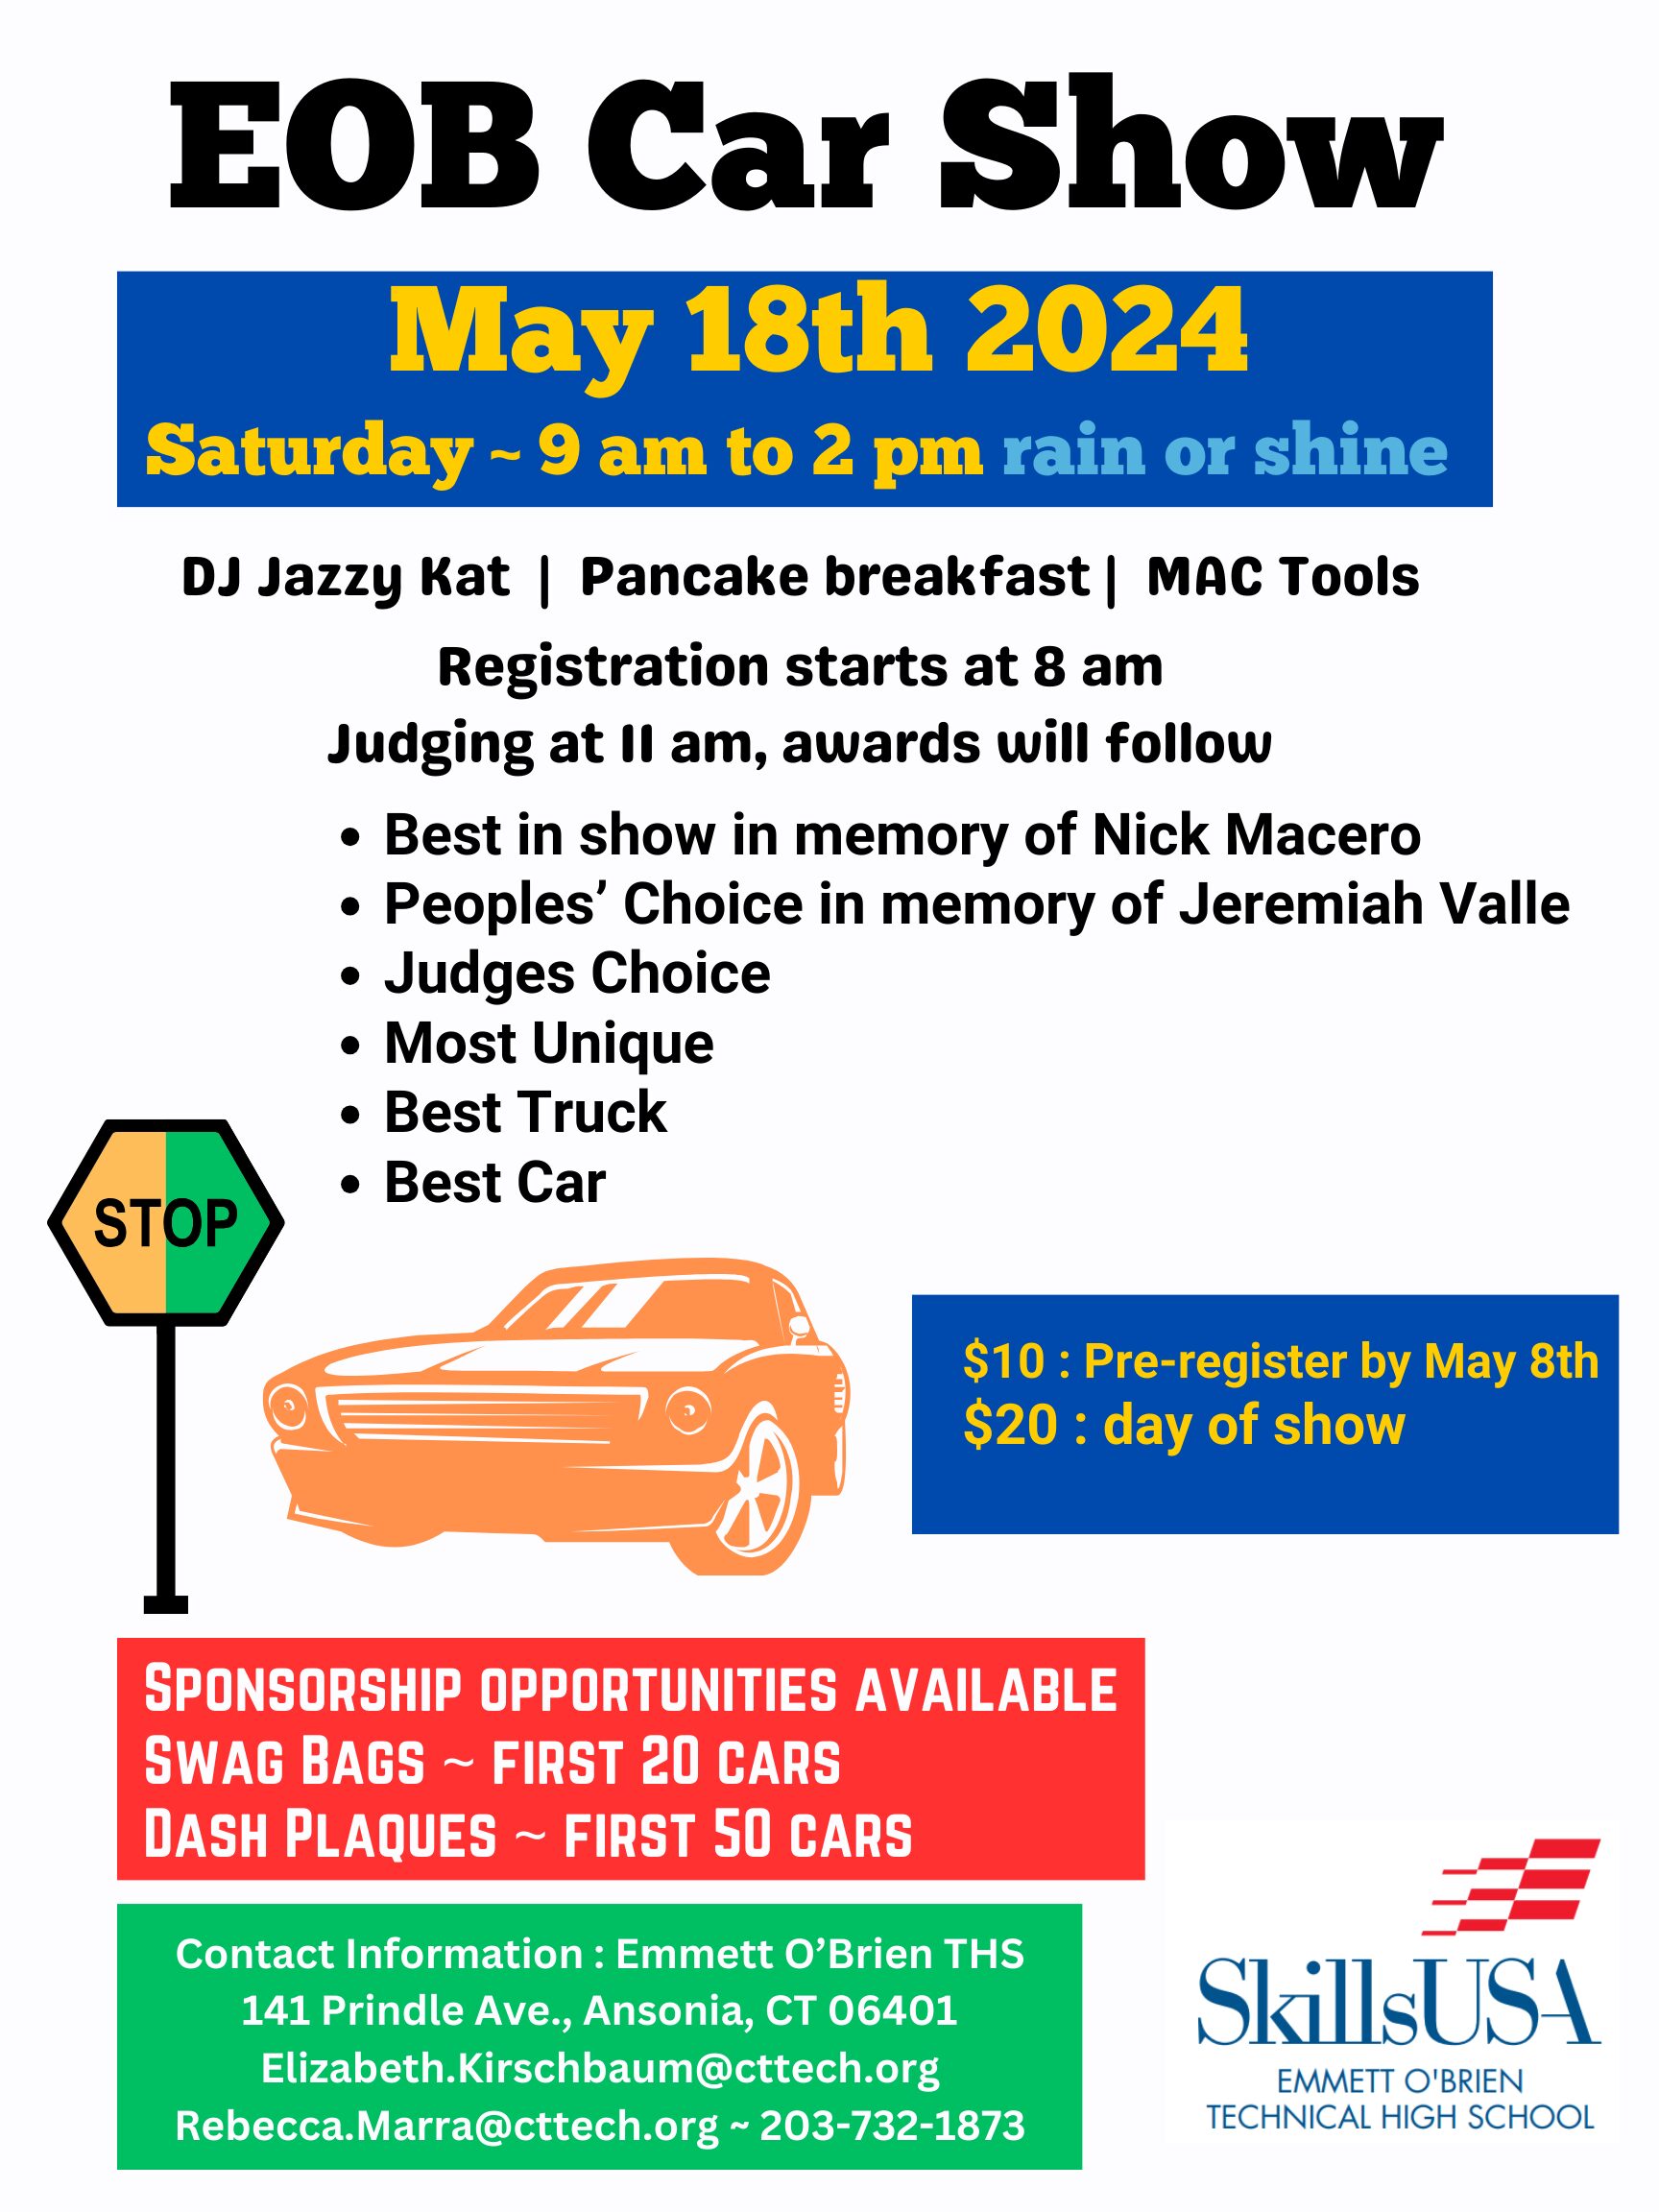 SkillsUSA sponsored Car Show. Happening rain or shie at EOB on May 18th, 2024 from 9-2. There will be a dj, pancake breakfast, MAC tools and awards for cars.